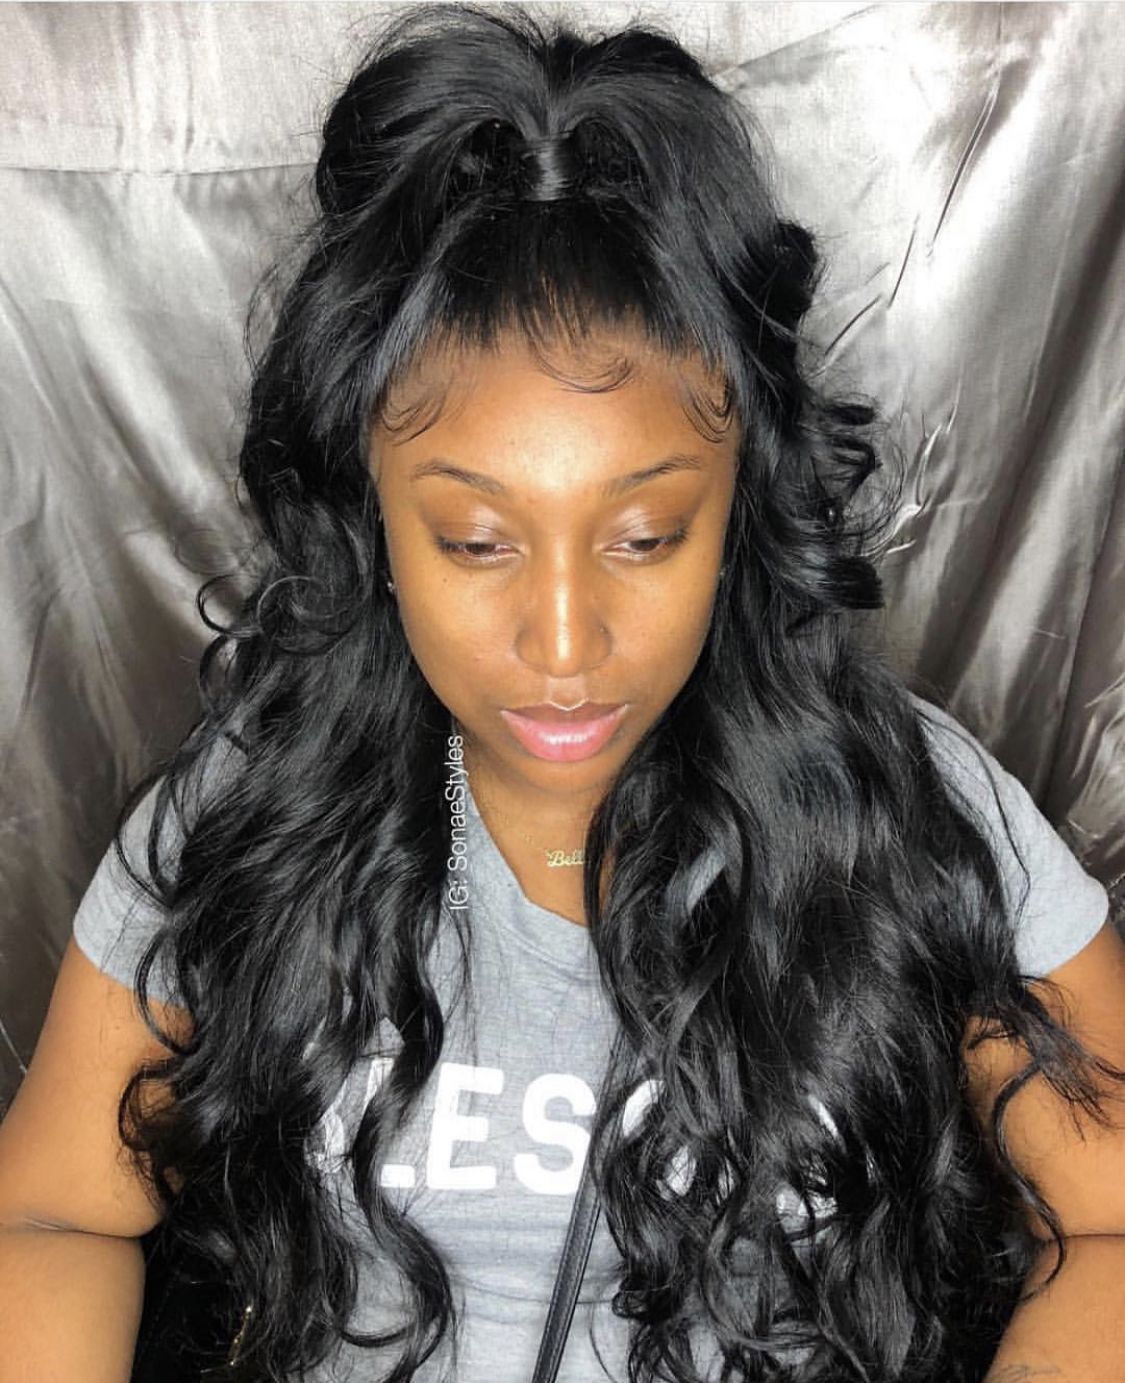 Weave Hairstyles Pin By My Info On Styles That Slay In 2019 Hair Styles Hair Prom Hairstyles Trends Network Explore Discover The Best And The Most Trending Hairstyles